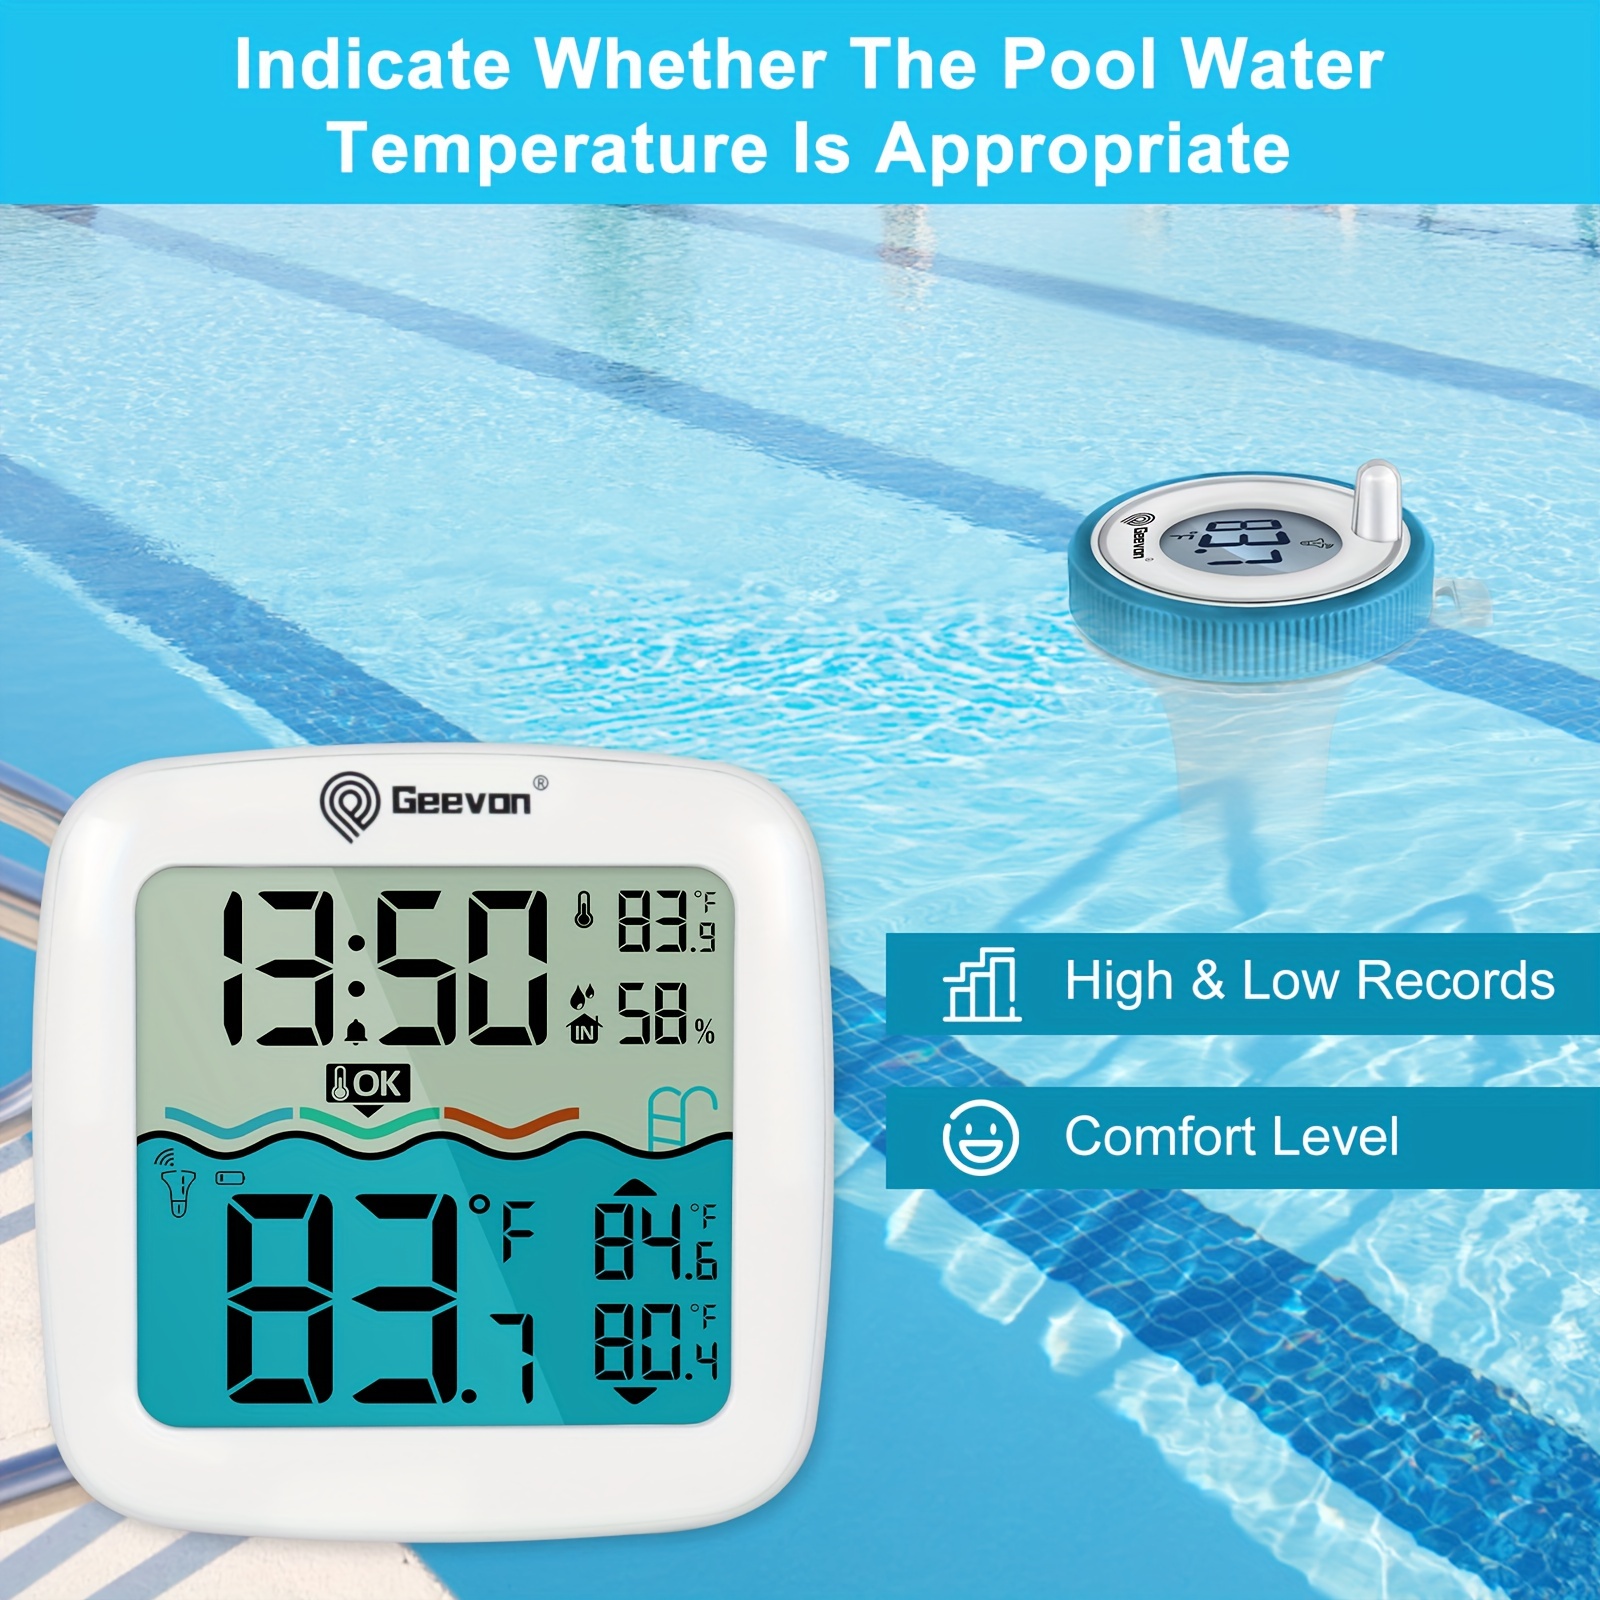 Digital water thermometer - Wireless pool thermometer